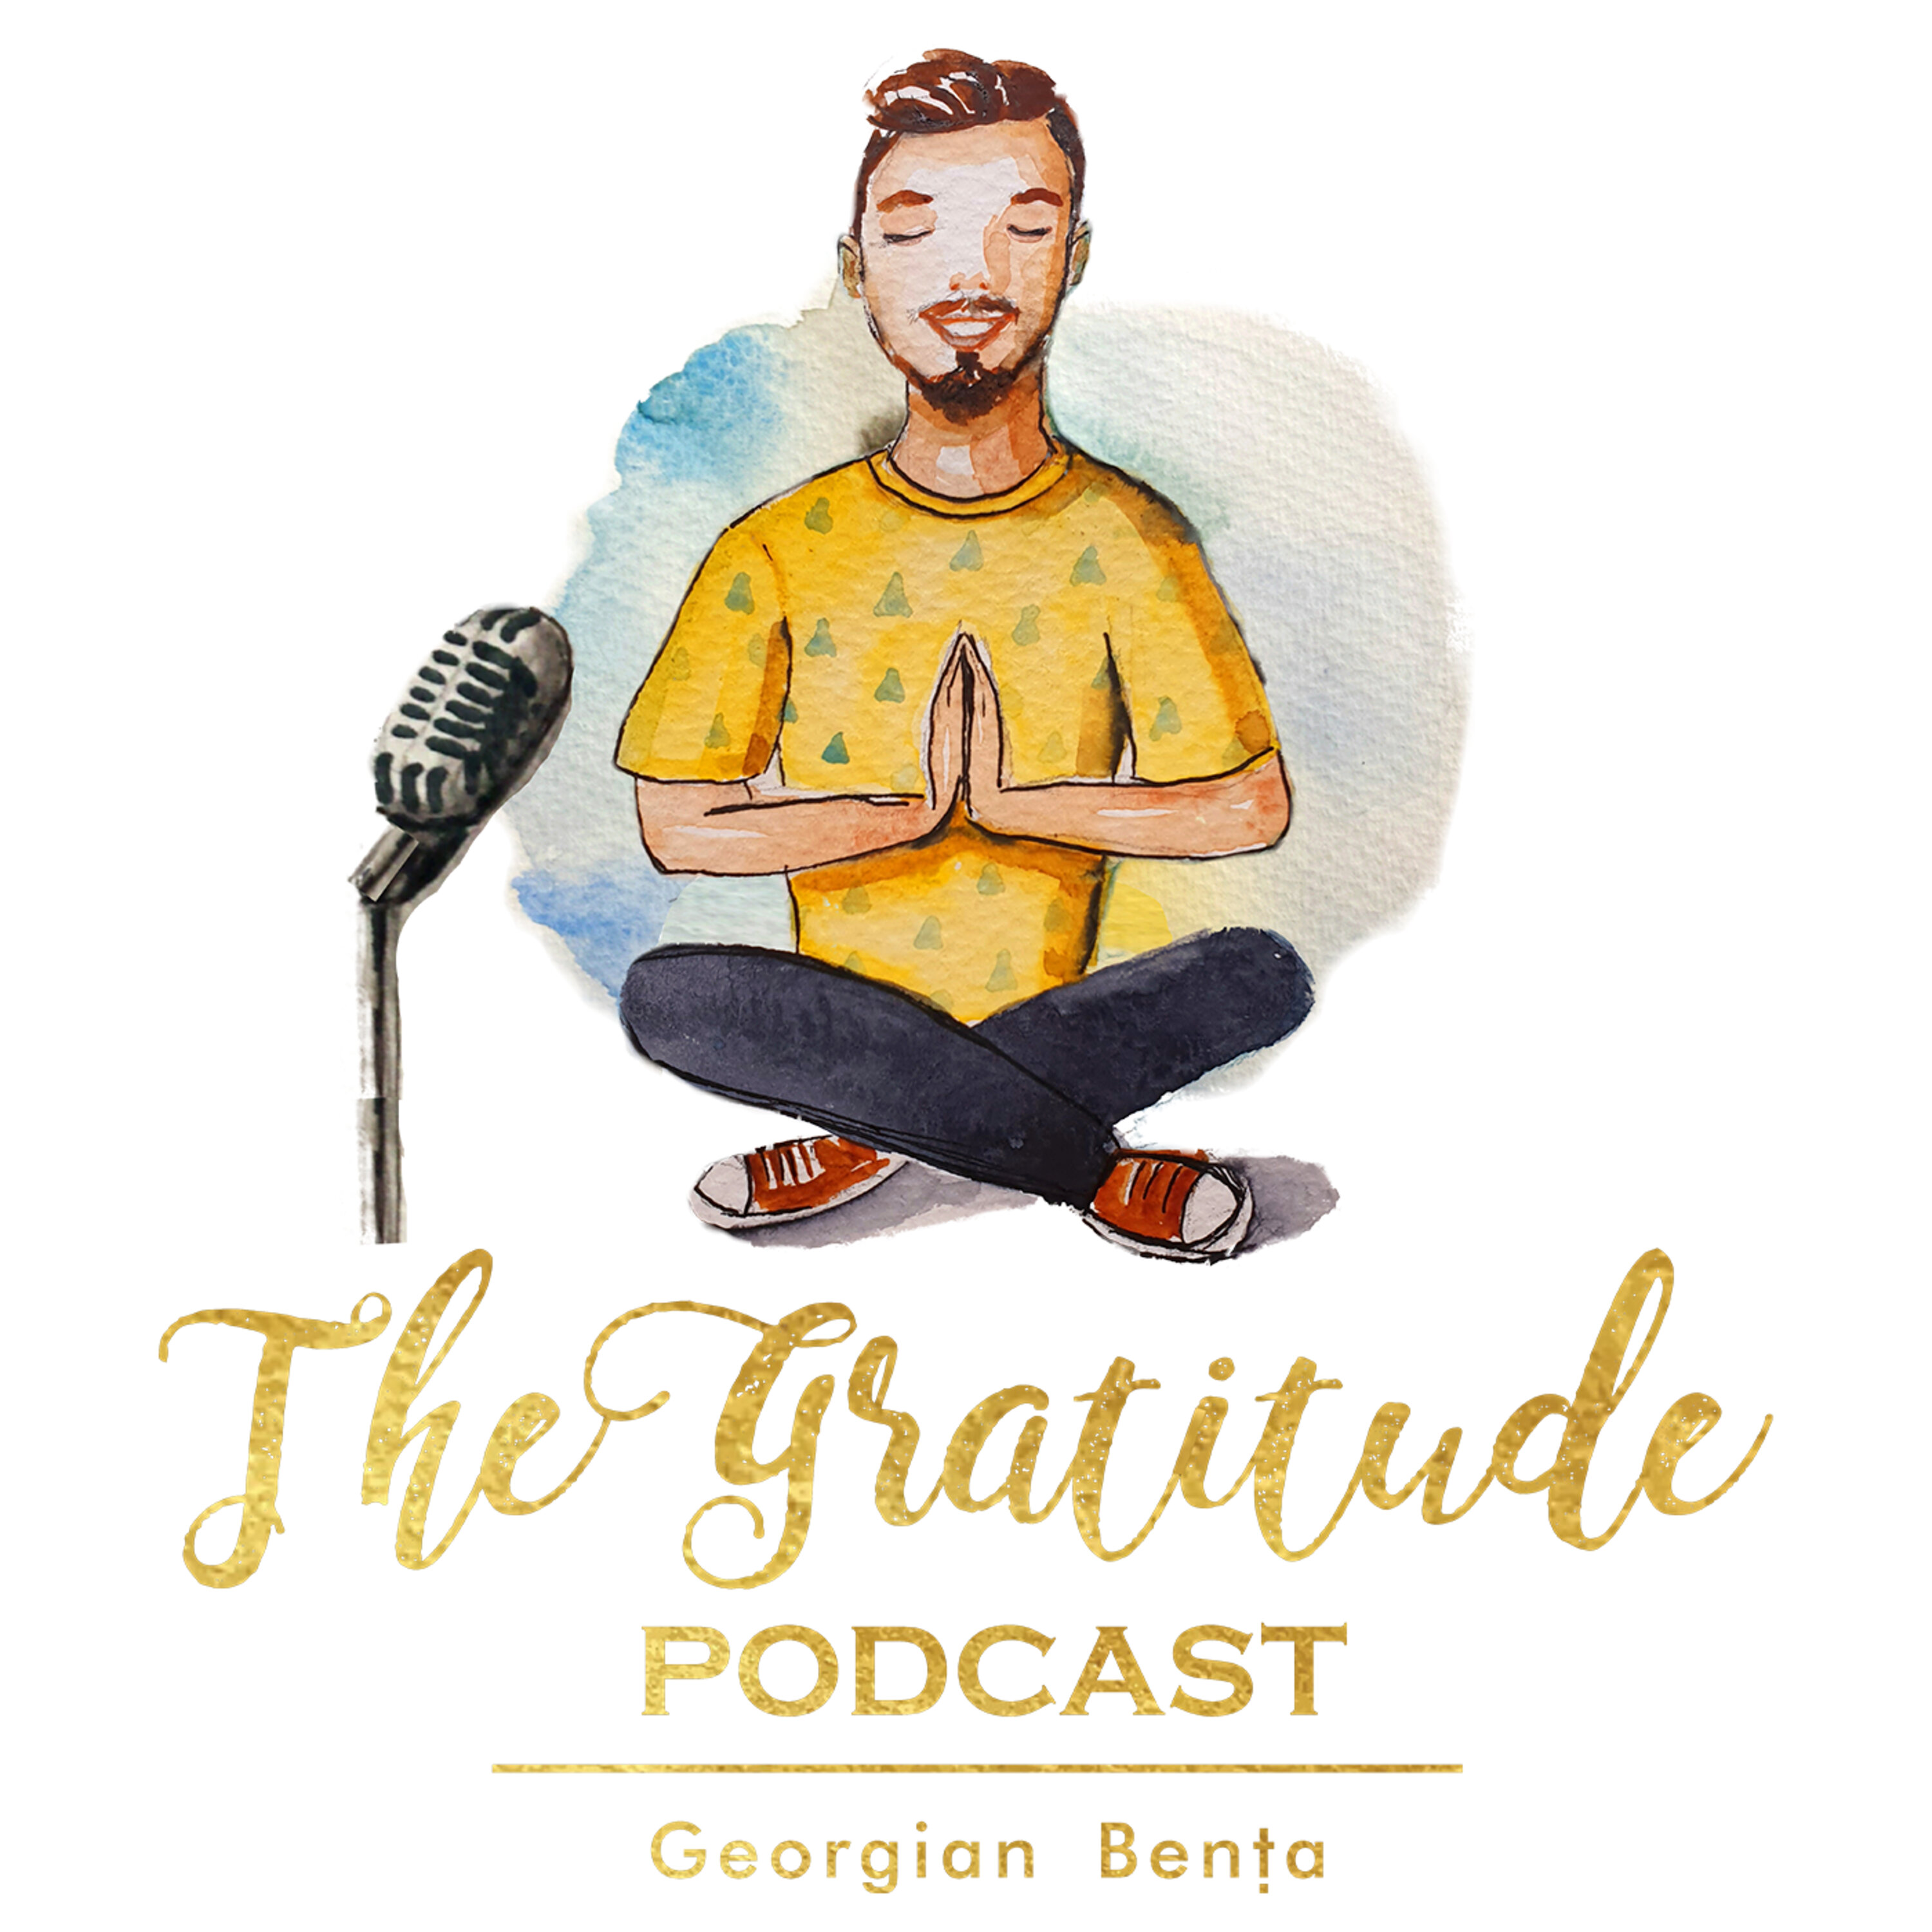 Tony Robbins On Gratitude - 3 Ideas That Can Change Your Life (ep. 675)